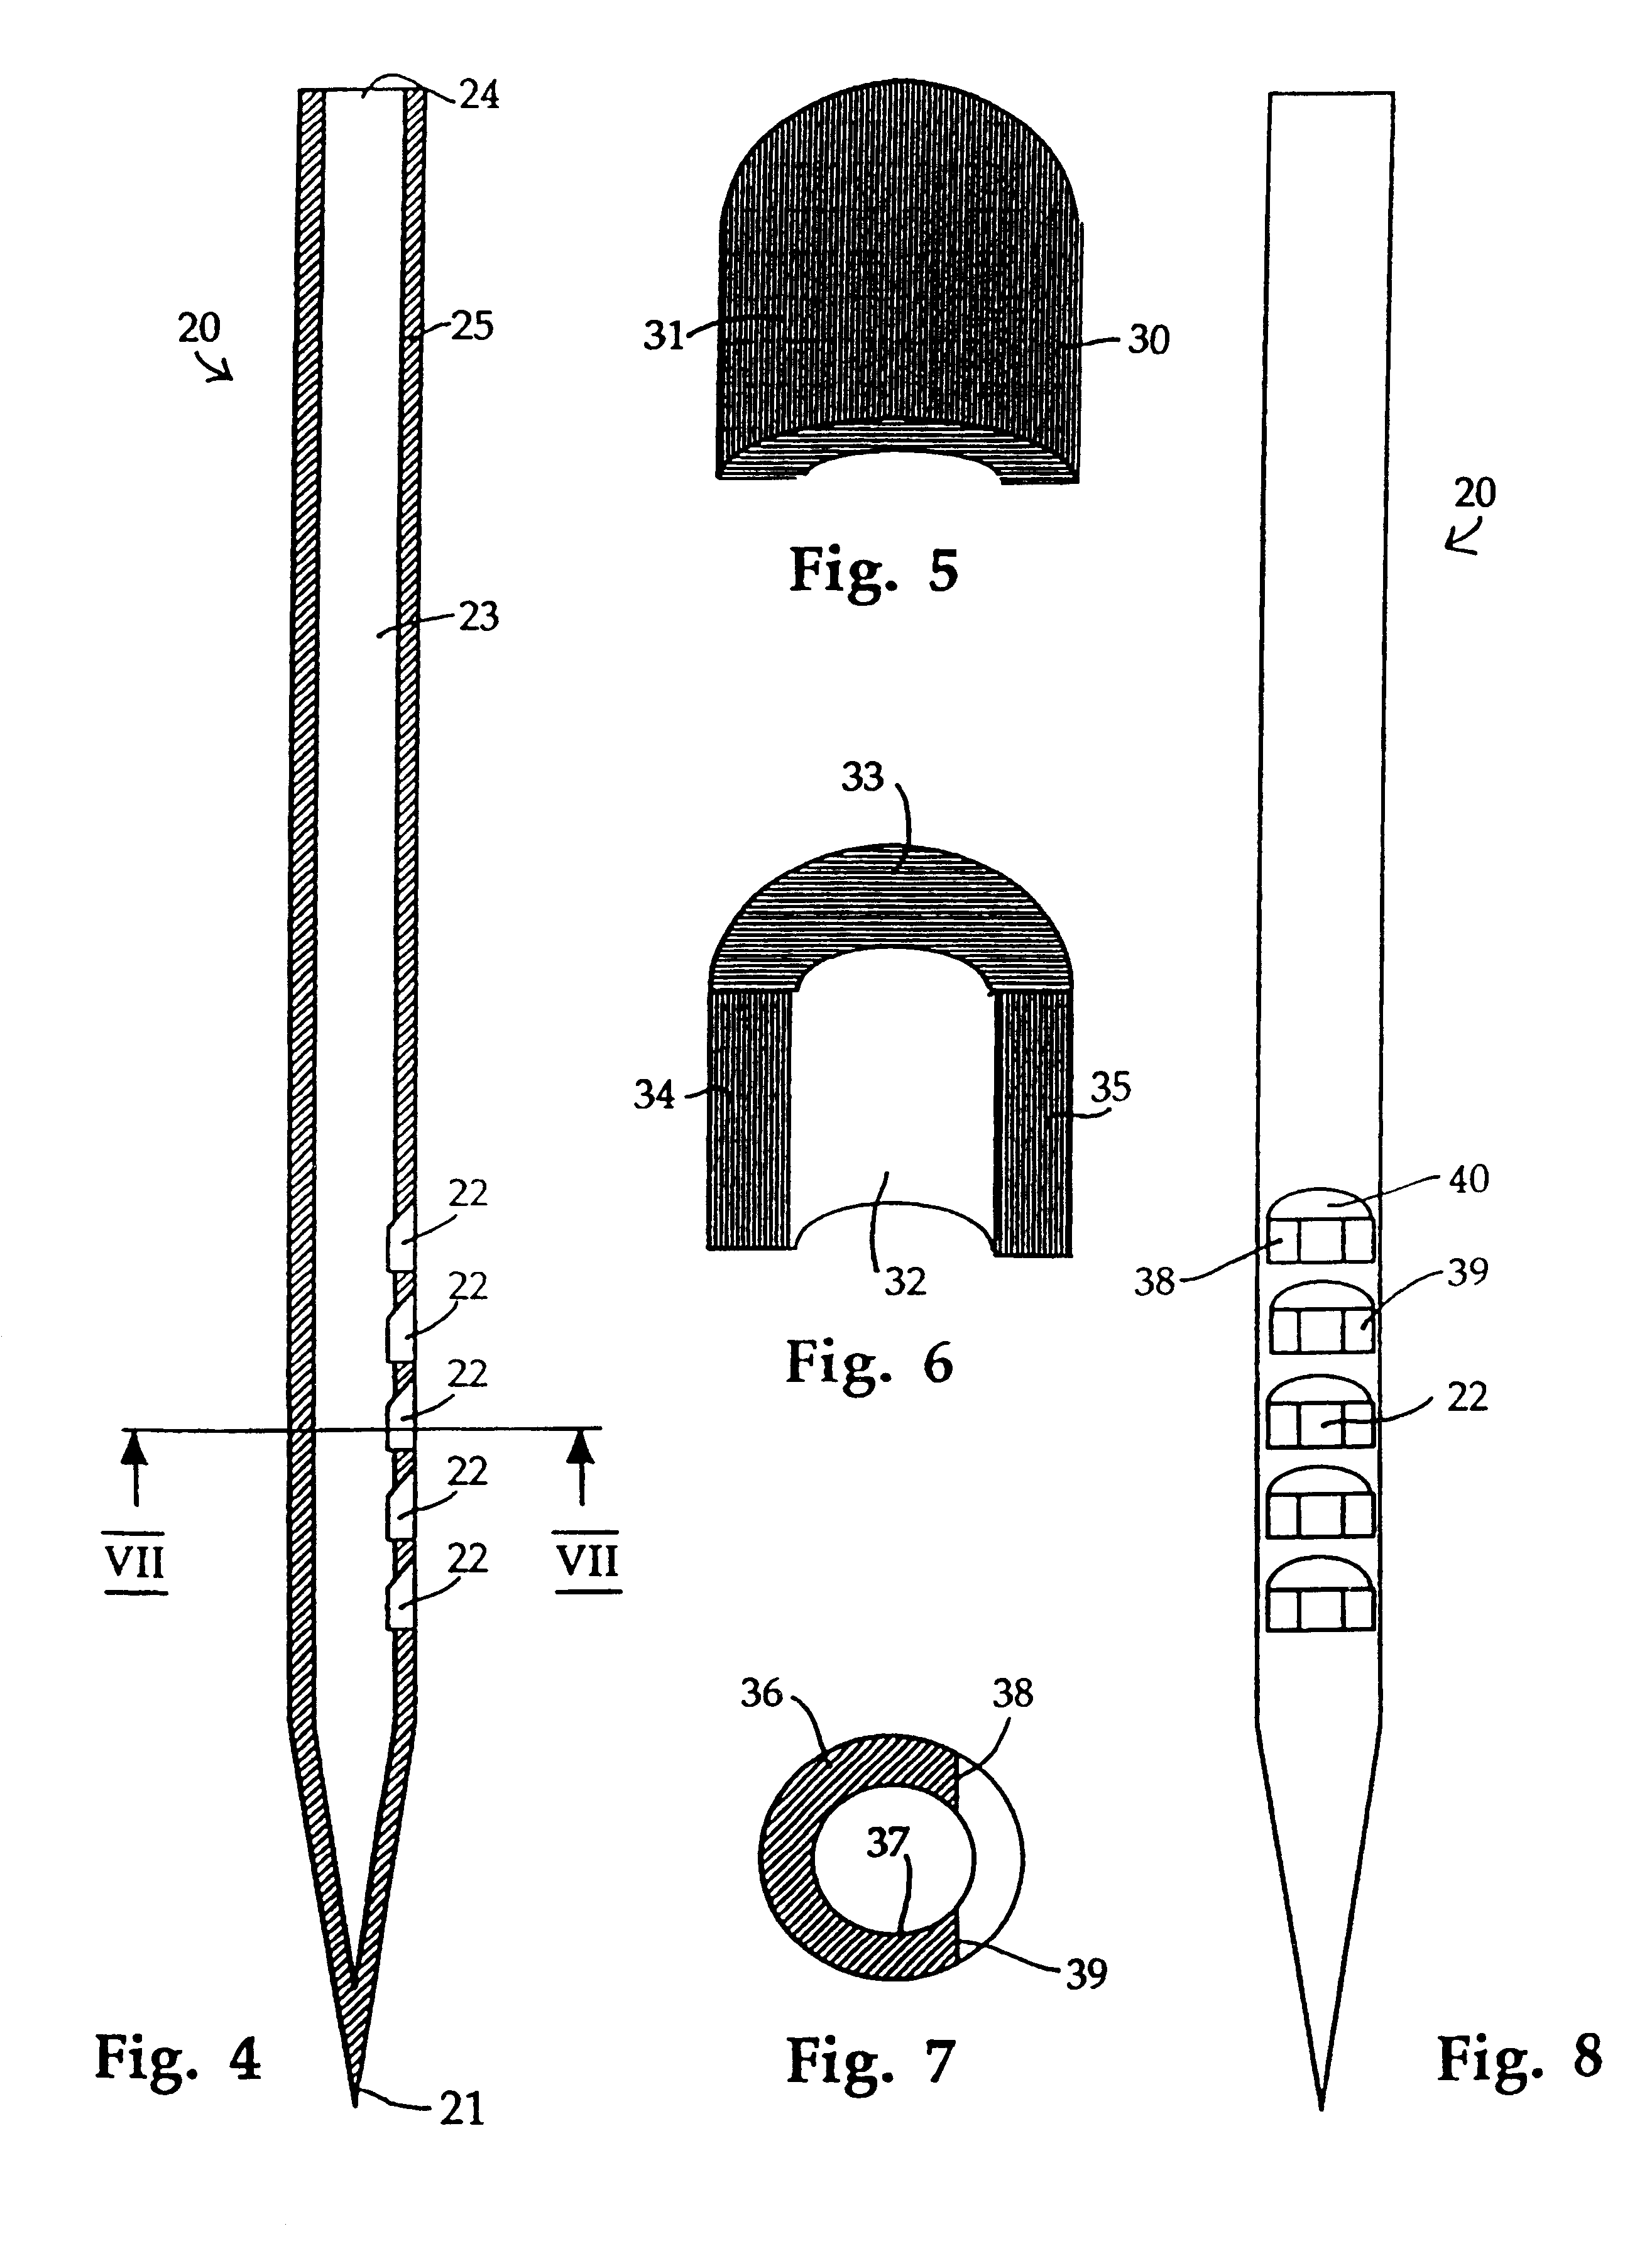 Needle for subcutaneous delivery of fluids